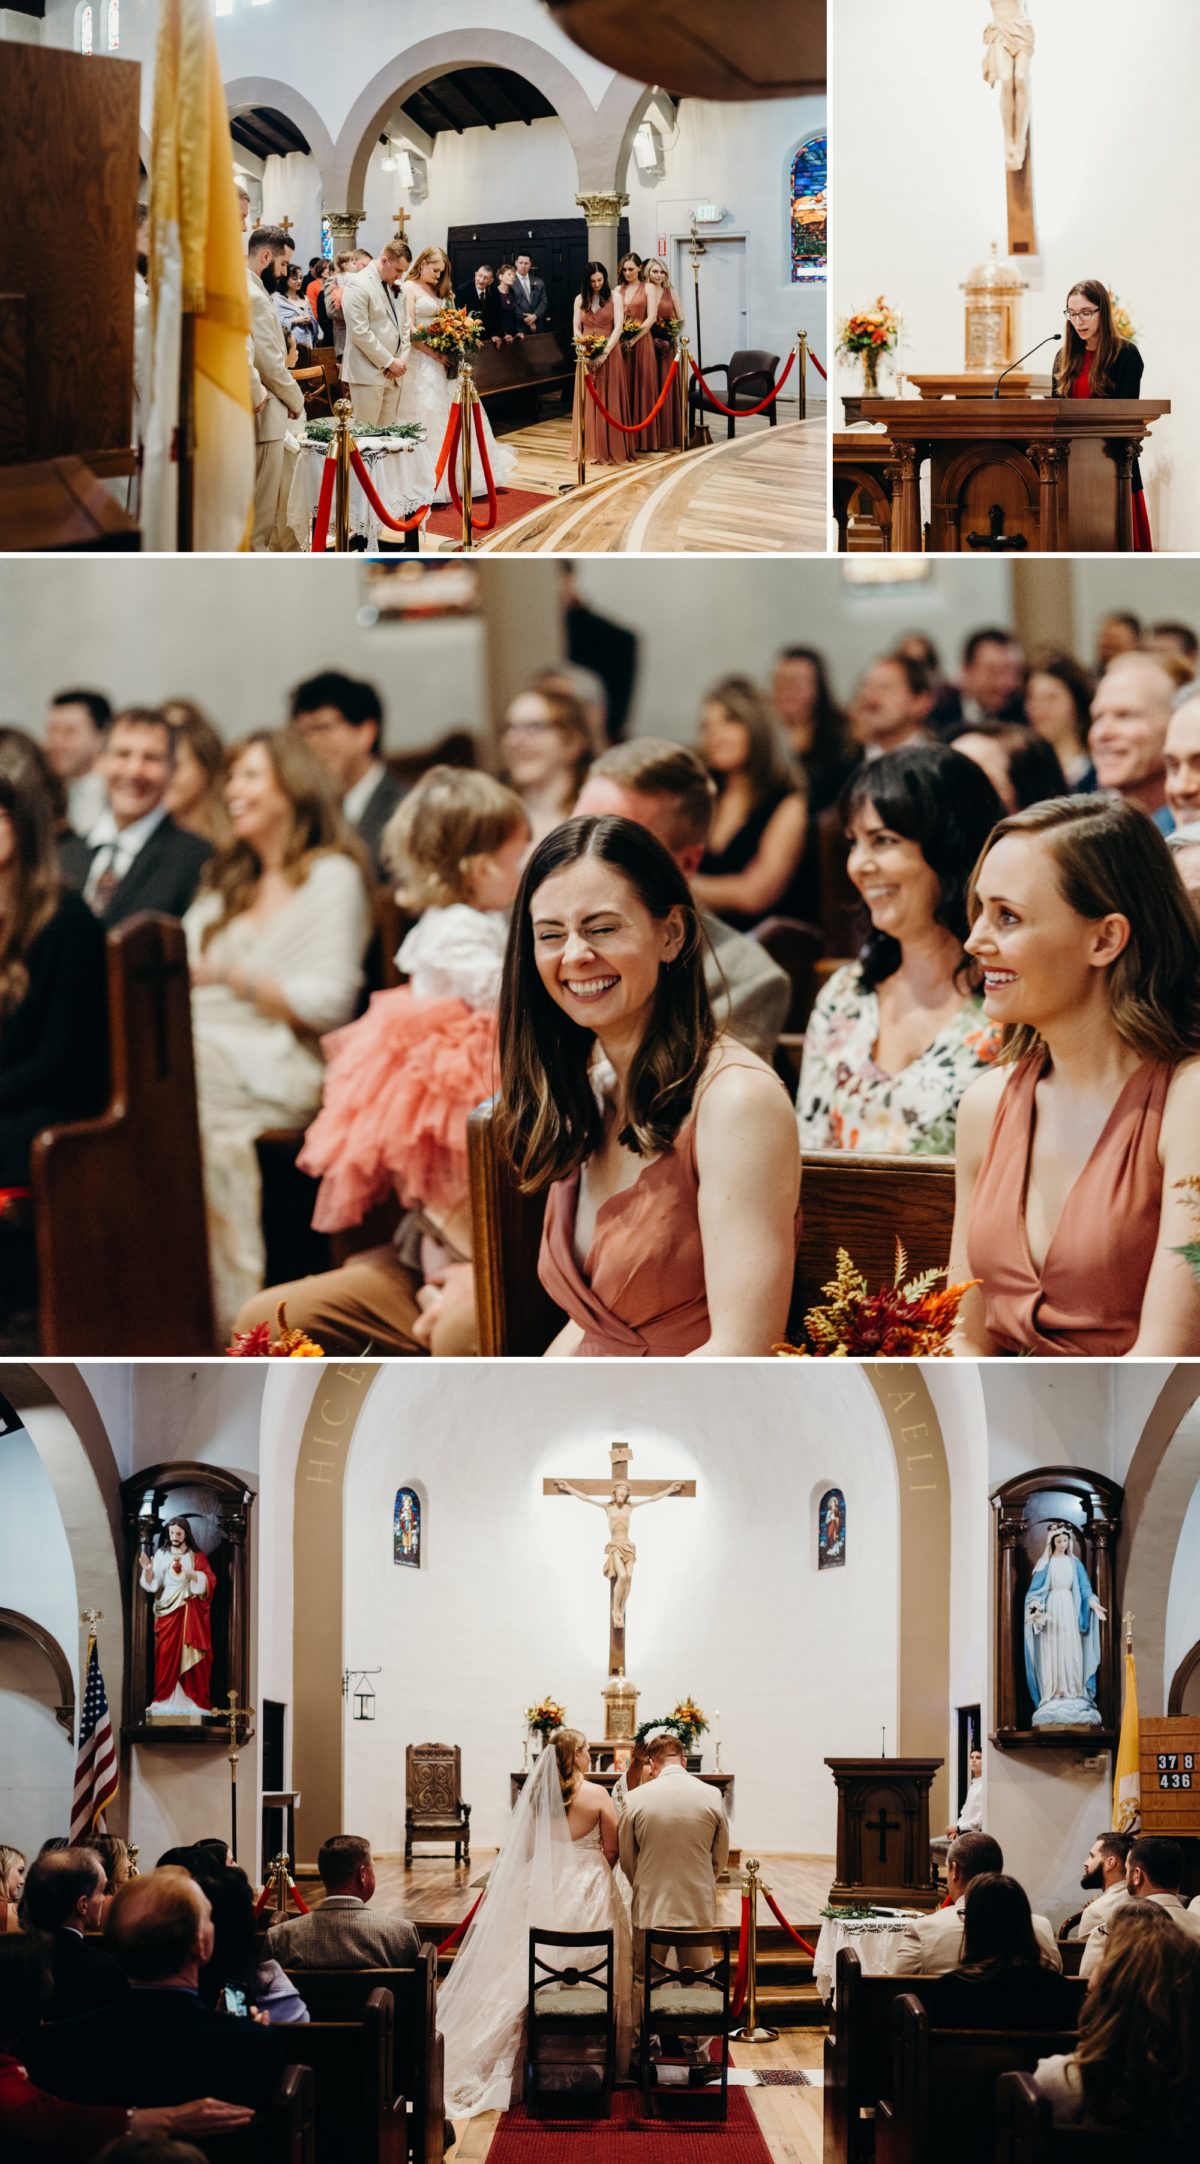 A Sacred Heart Catholic Church wedding in Gridley, CA photographed by Briana Morrison